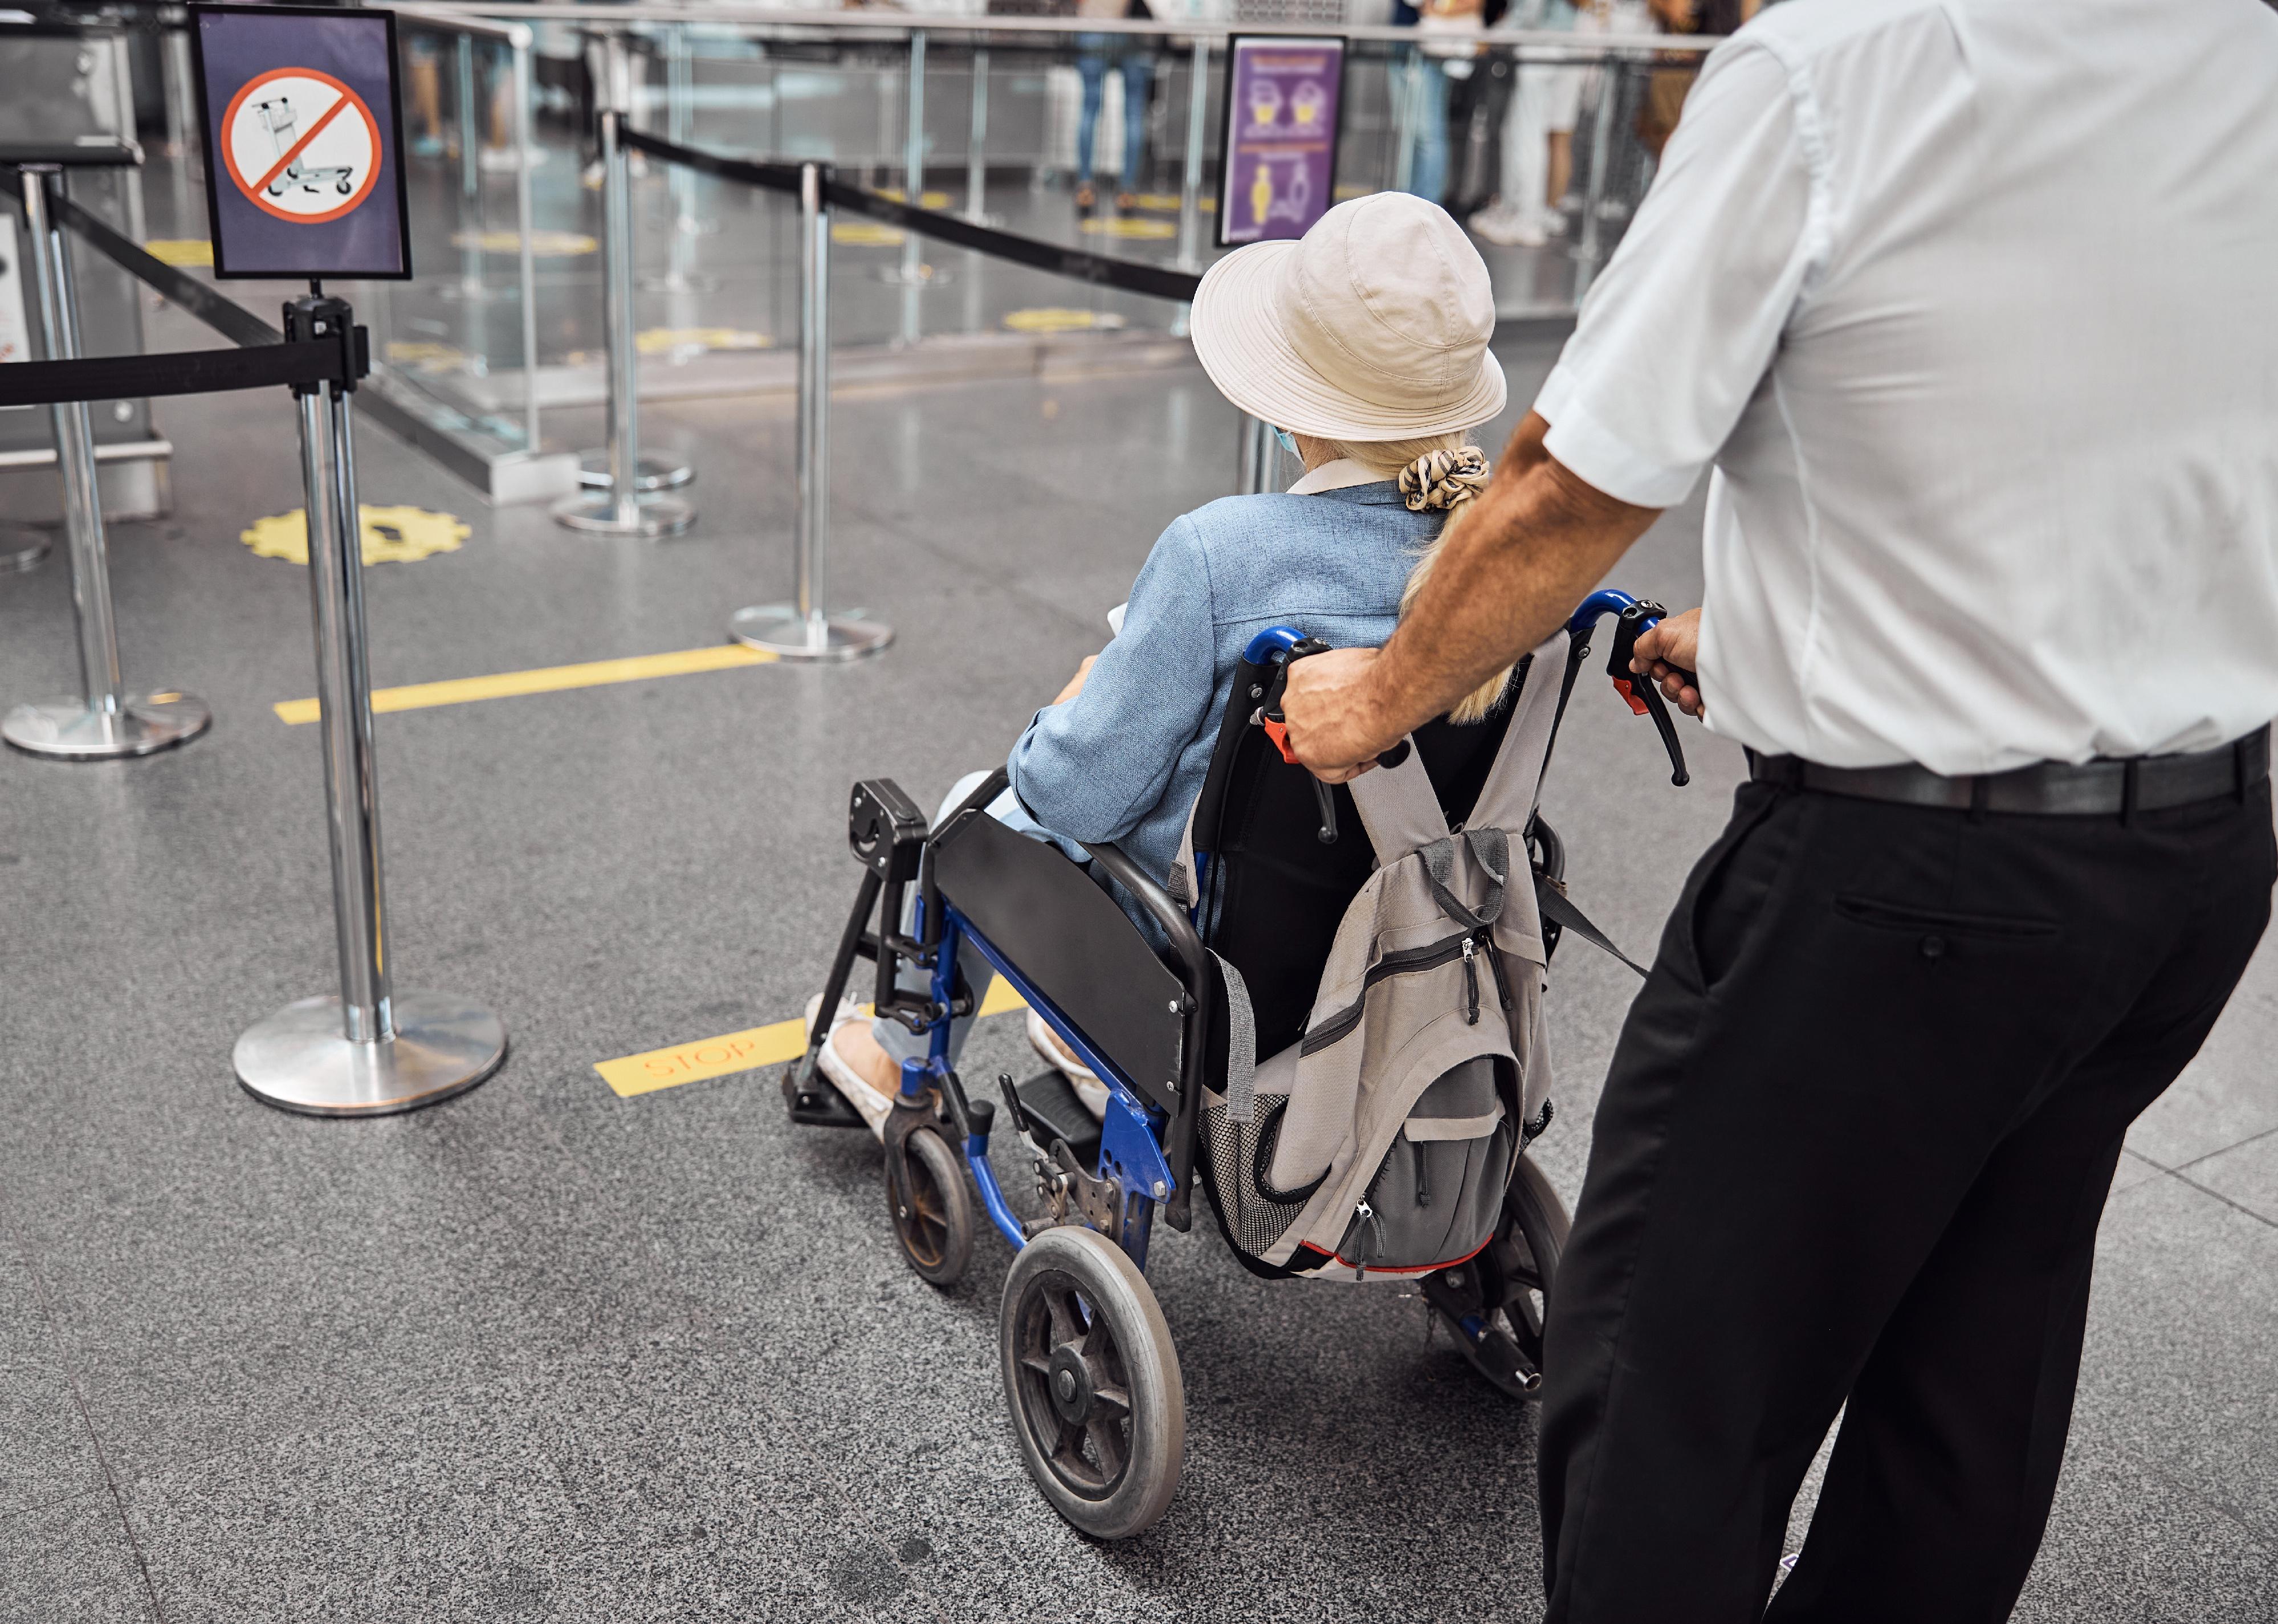 Back view of an airport male employee transporting a disabled female traveler to a plane